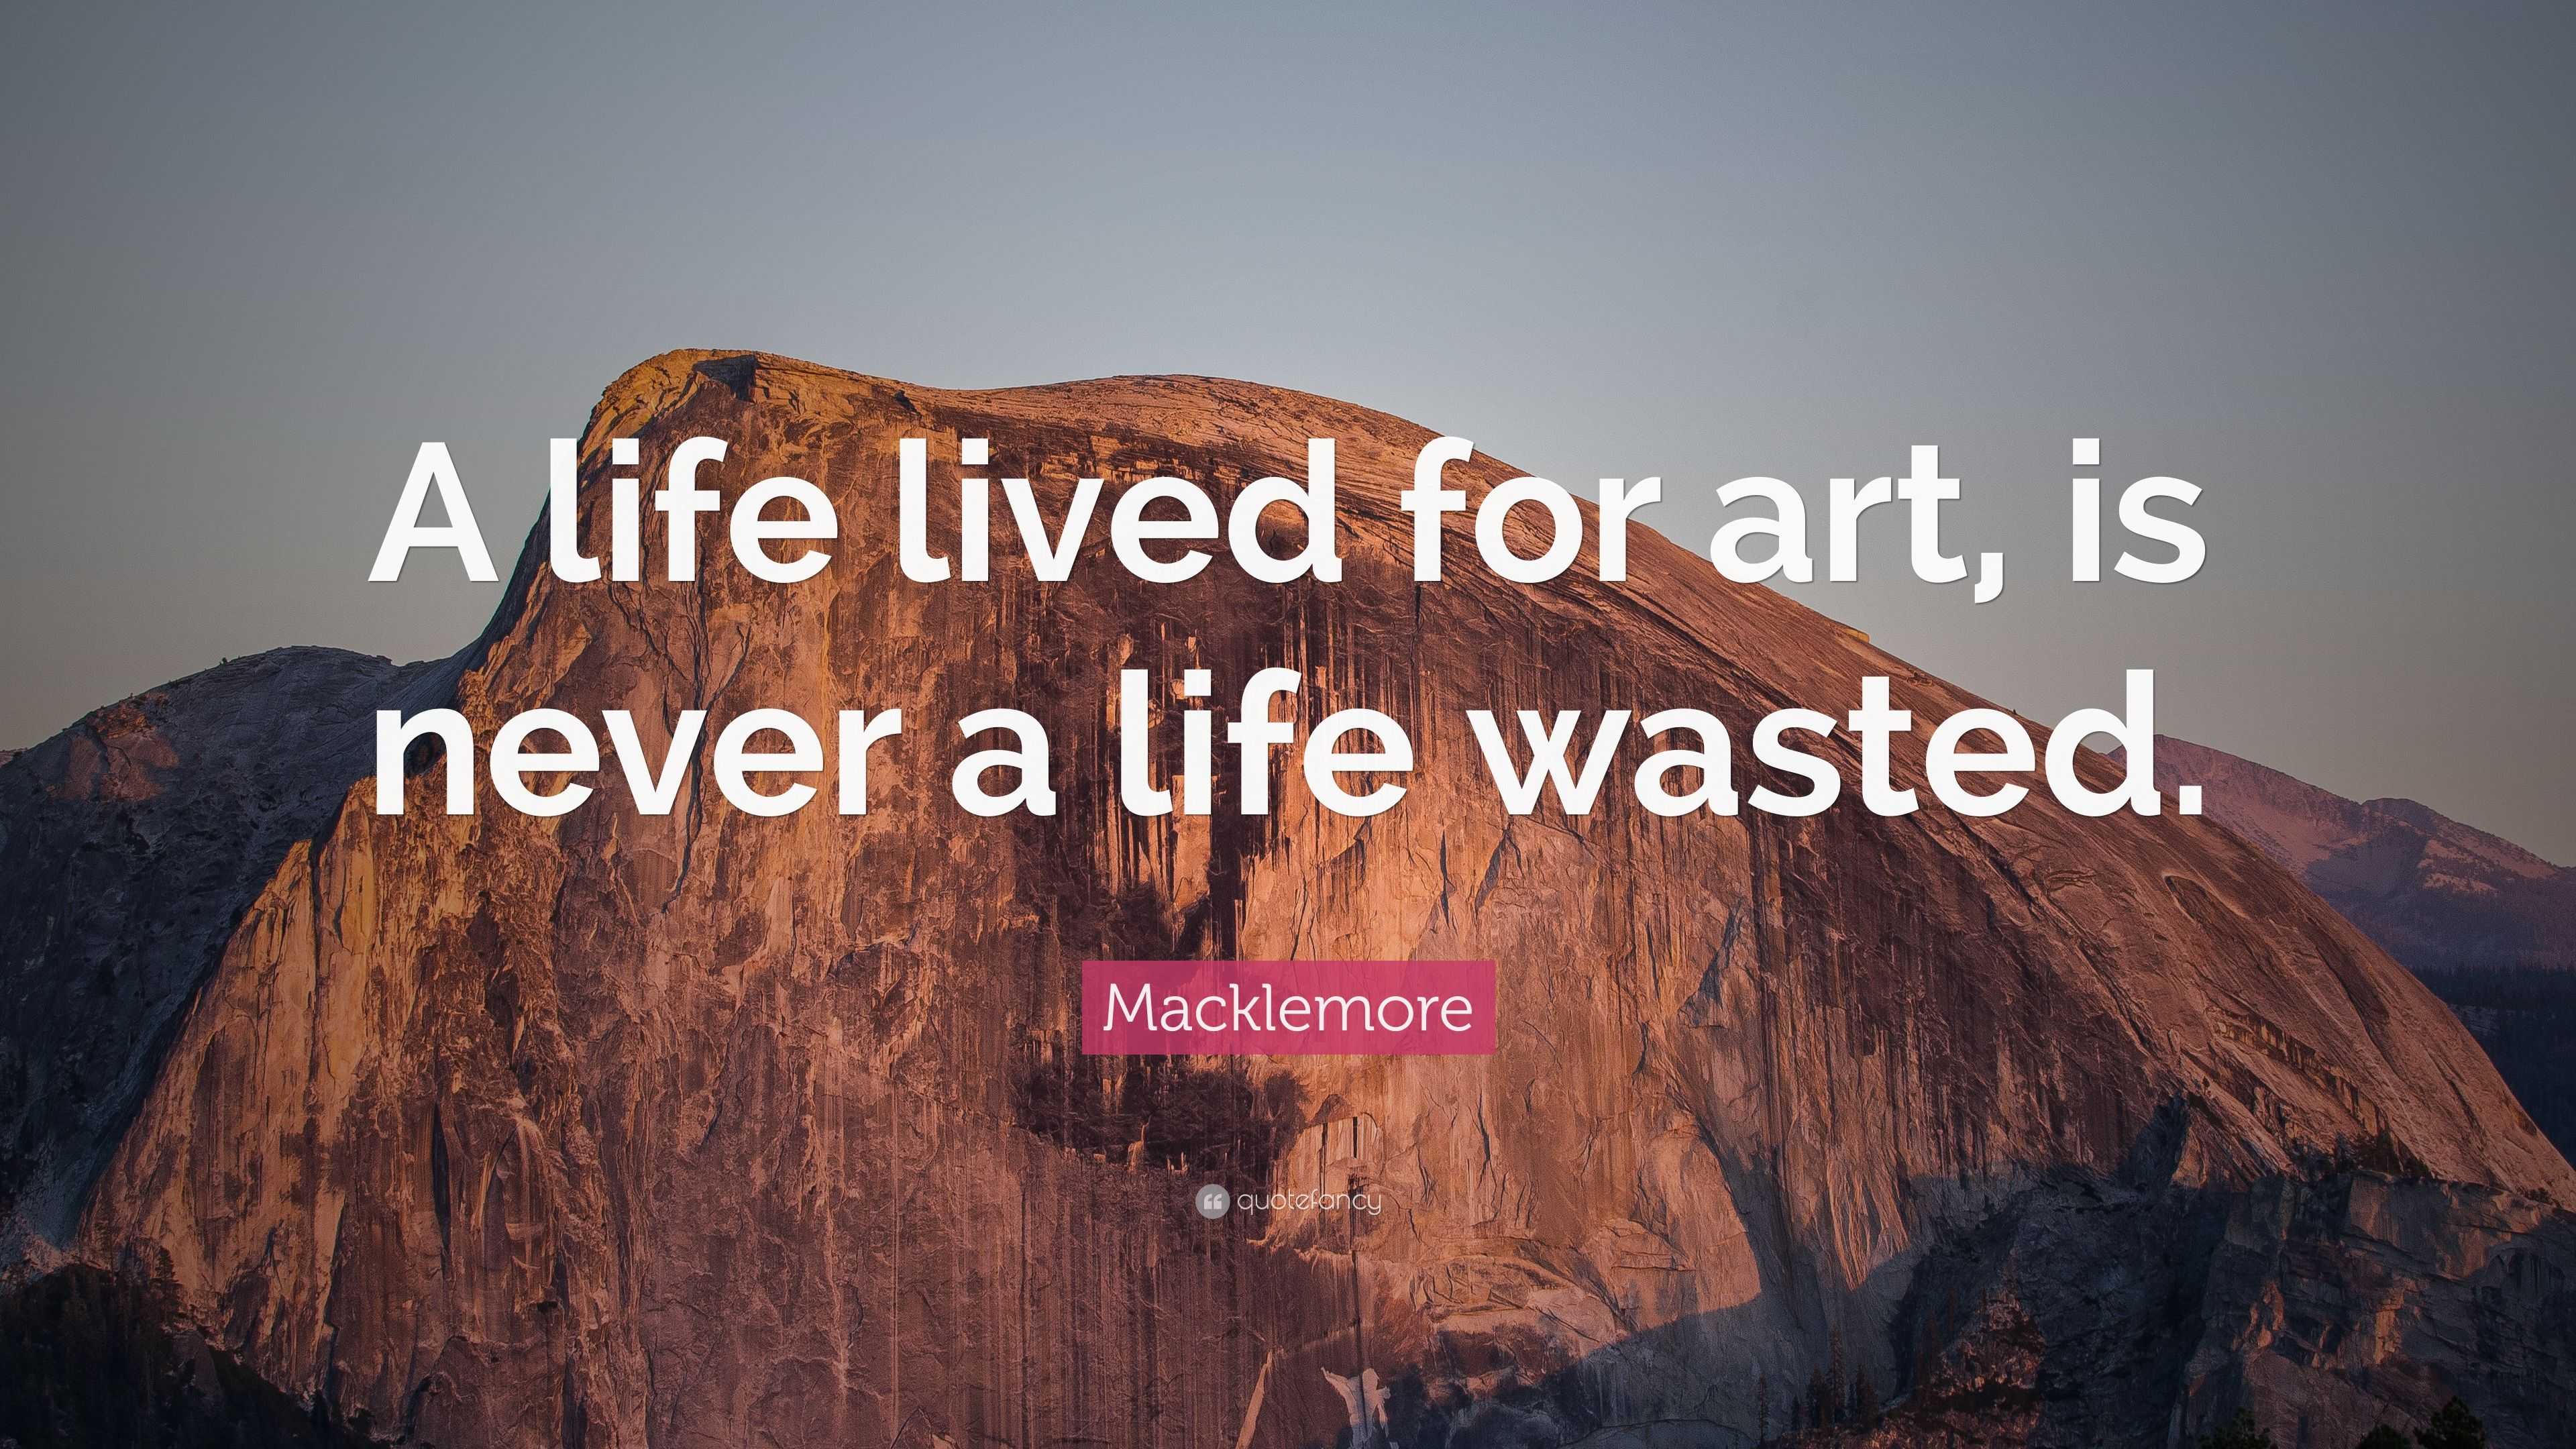 Macklemore Quote “A life lived for art is never a life wasted